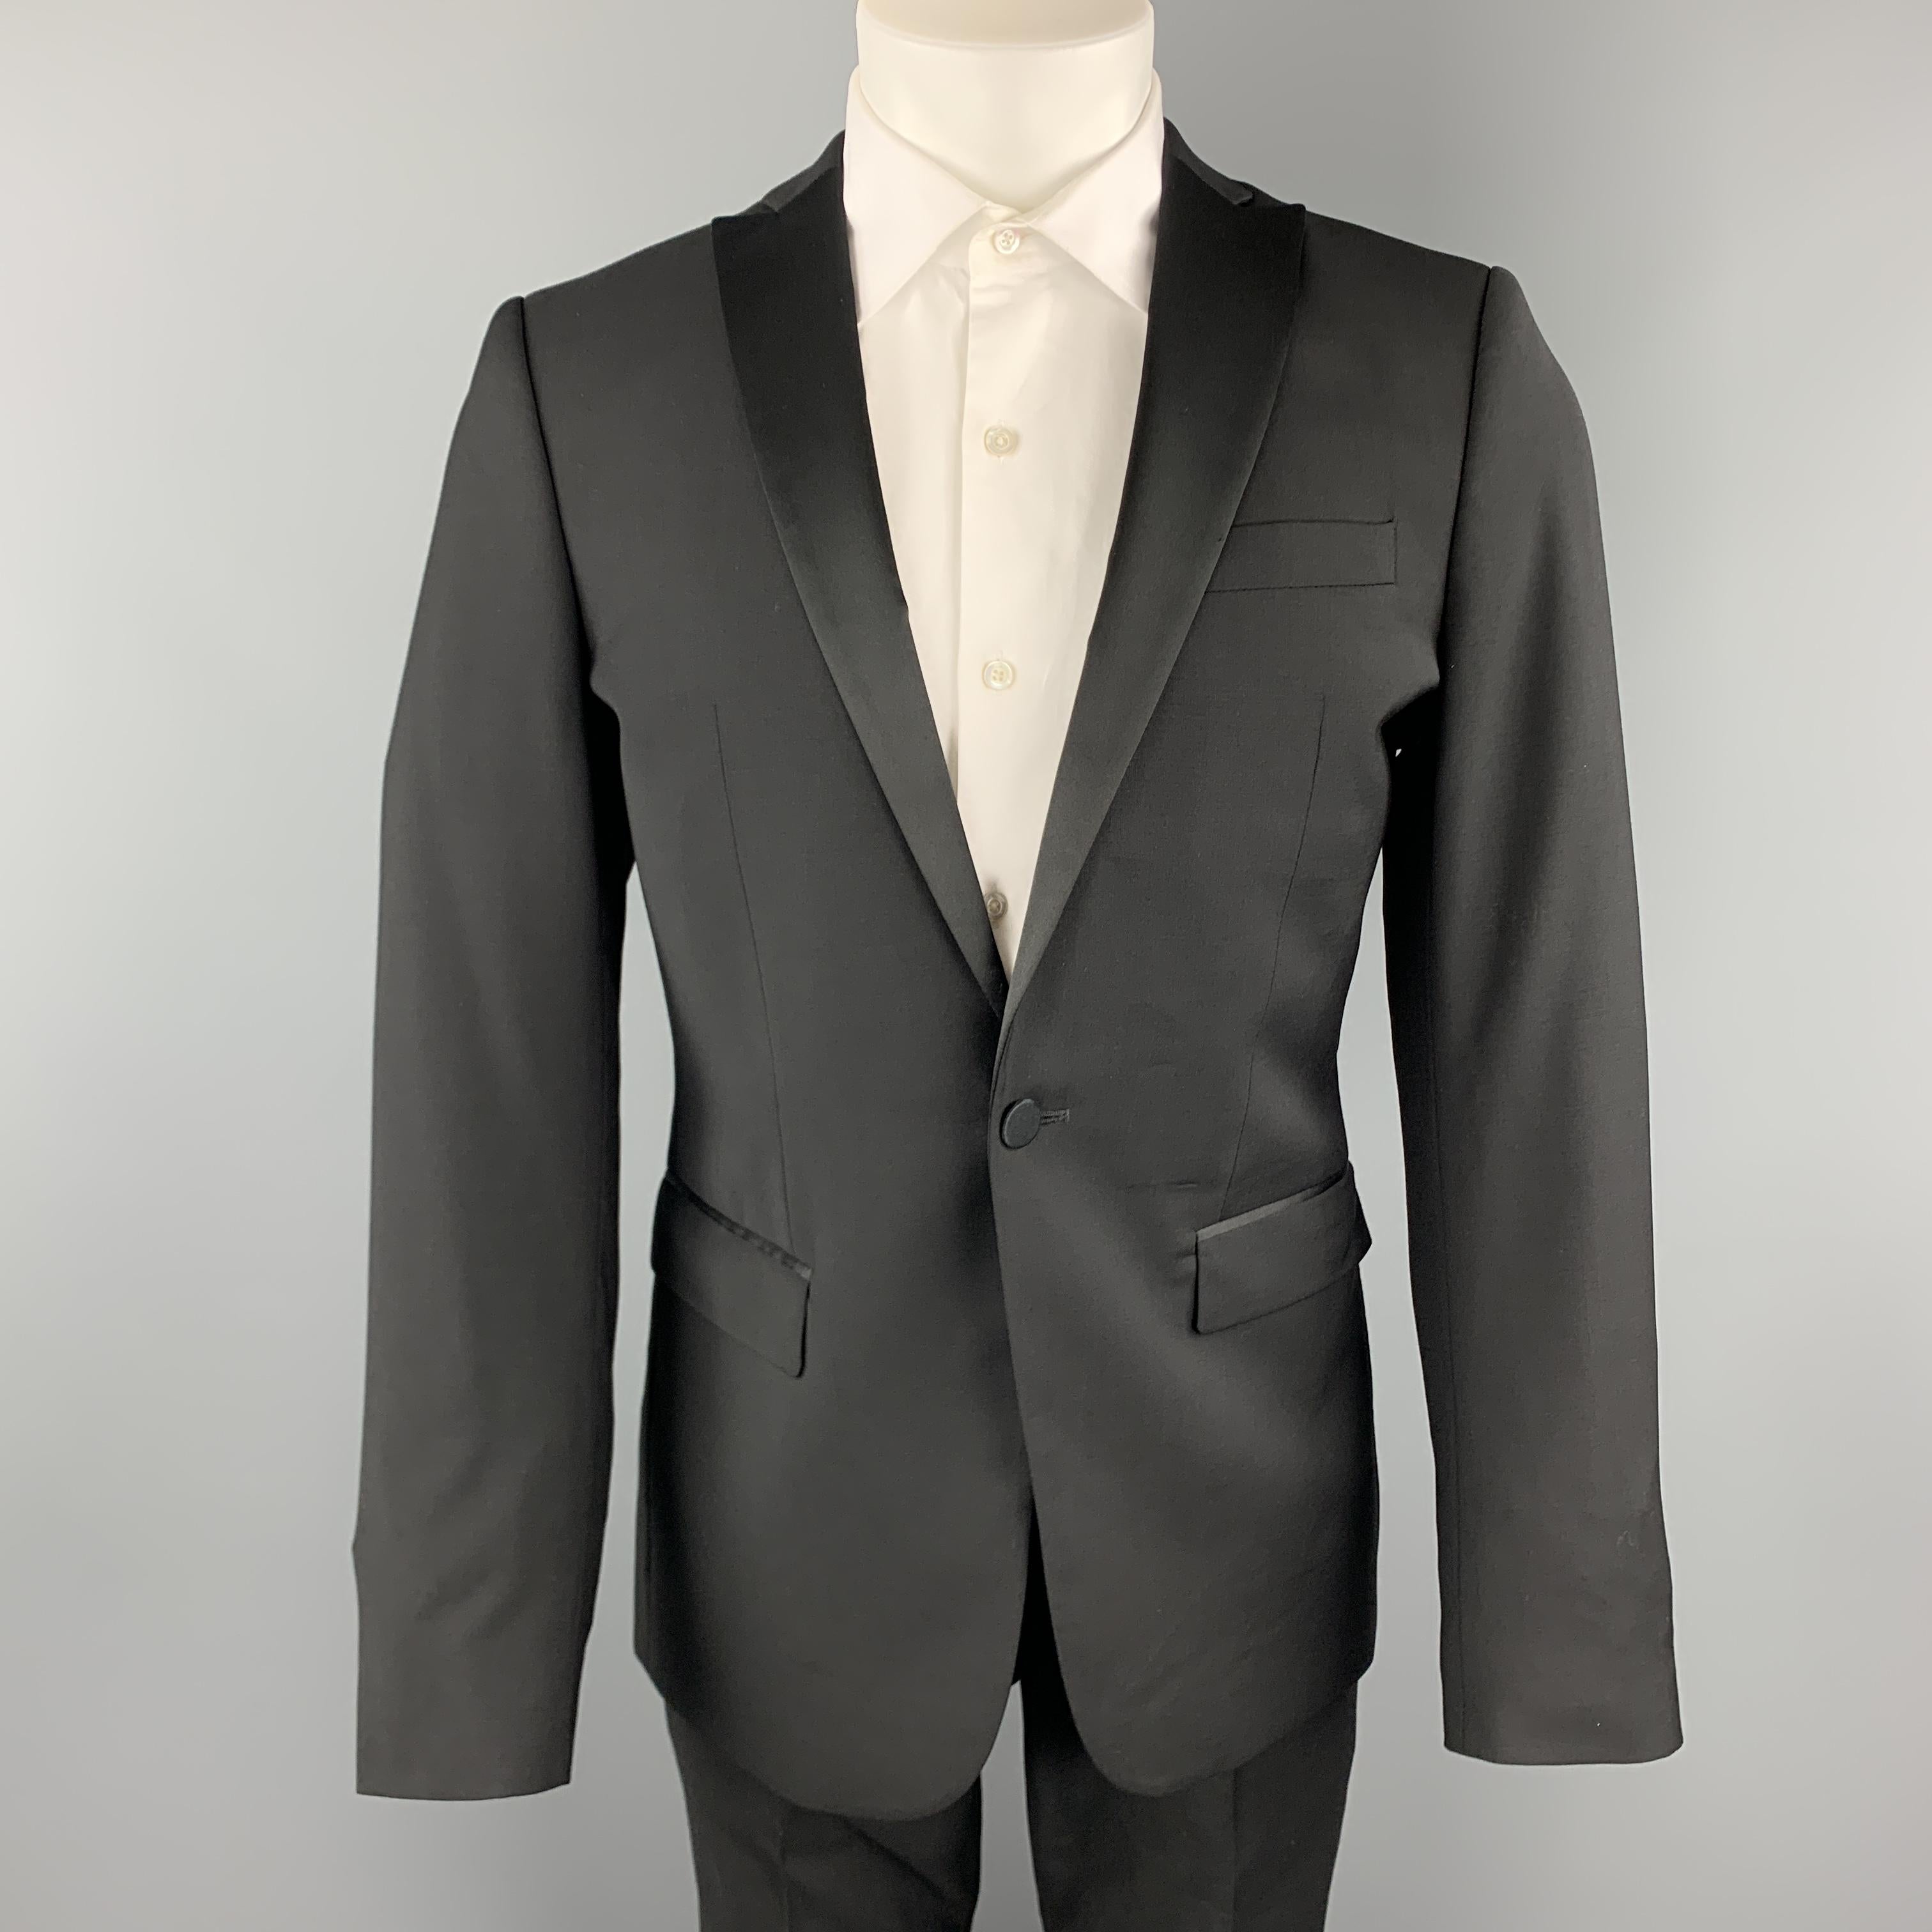 J. LINDEBERG tuxedo suit comes in light weight wool gabardine and includes a single breasted, one button sport coat with satin peak lapel and matching flat  front satin stripe trousers. 

Excellent Pre-Owned Condition.
Marked: IT 46